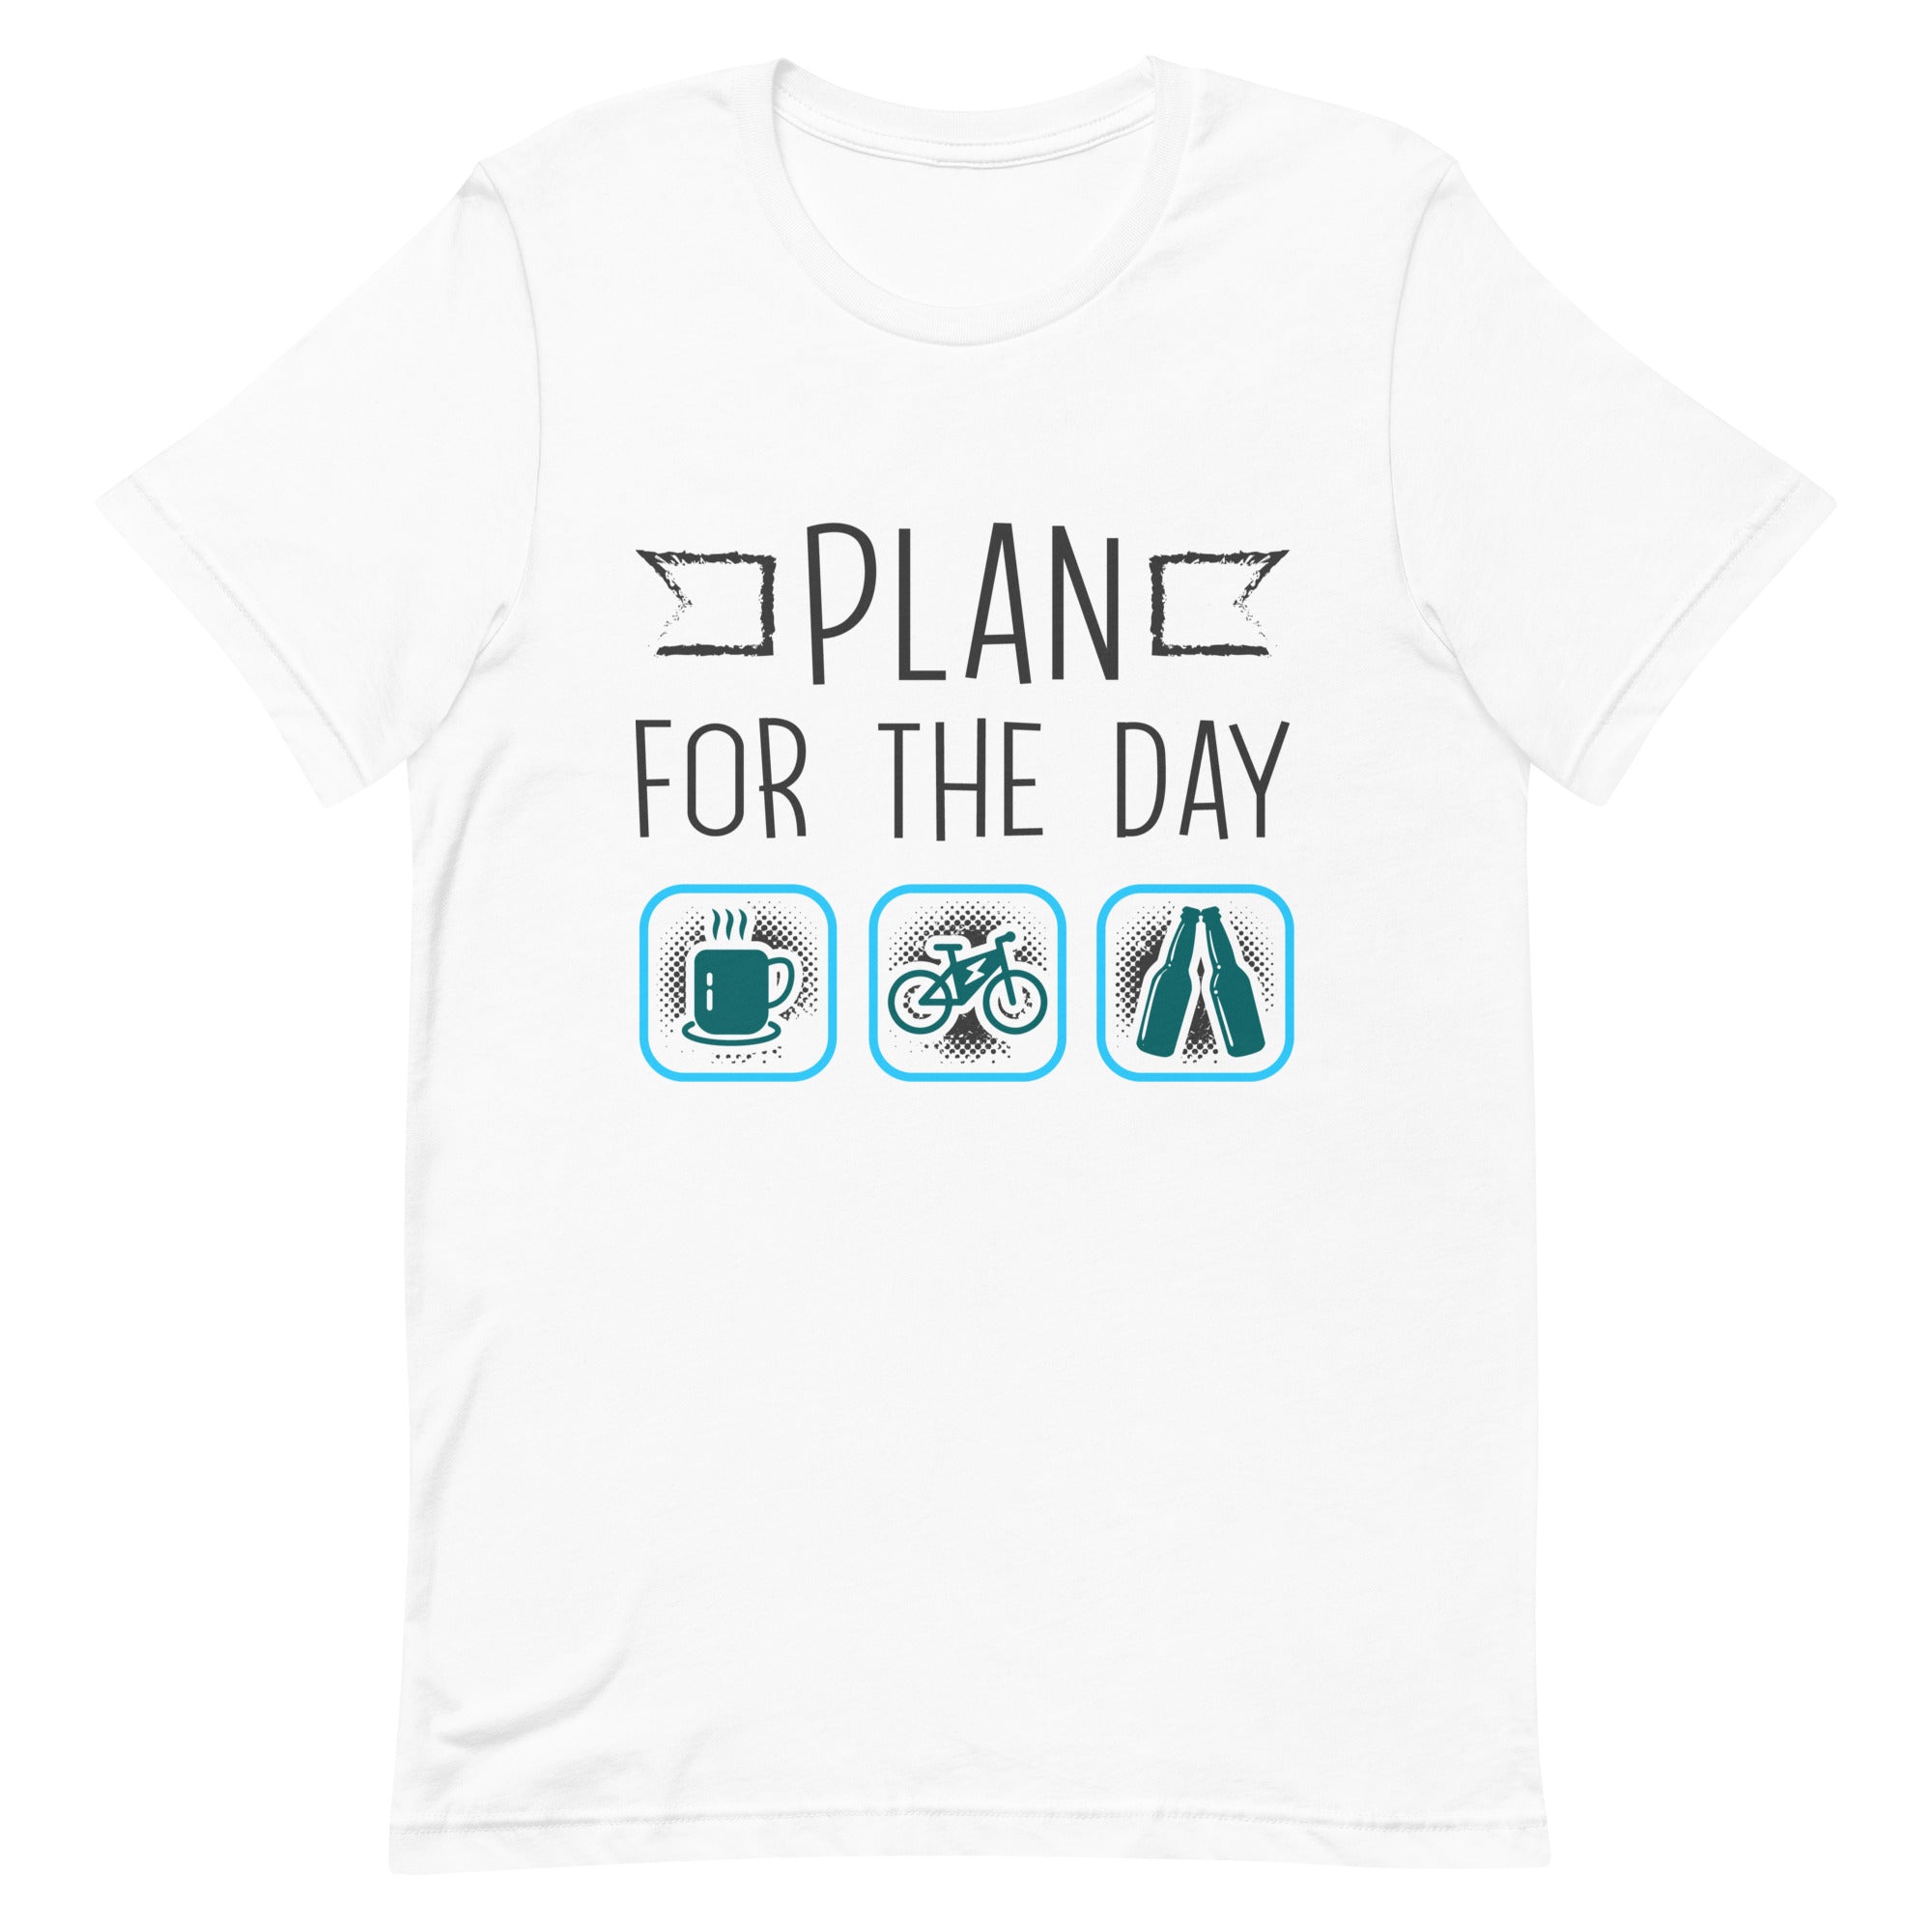 Plan for the Day "Coffee, E-bike, Beer" Bella + Canvas 3001 Women's Tshirt White